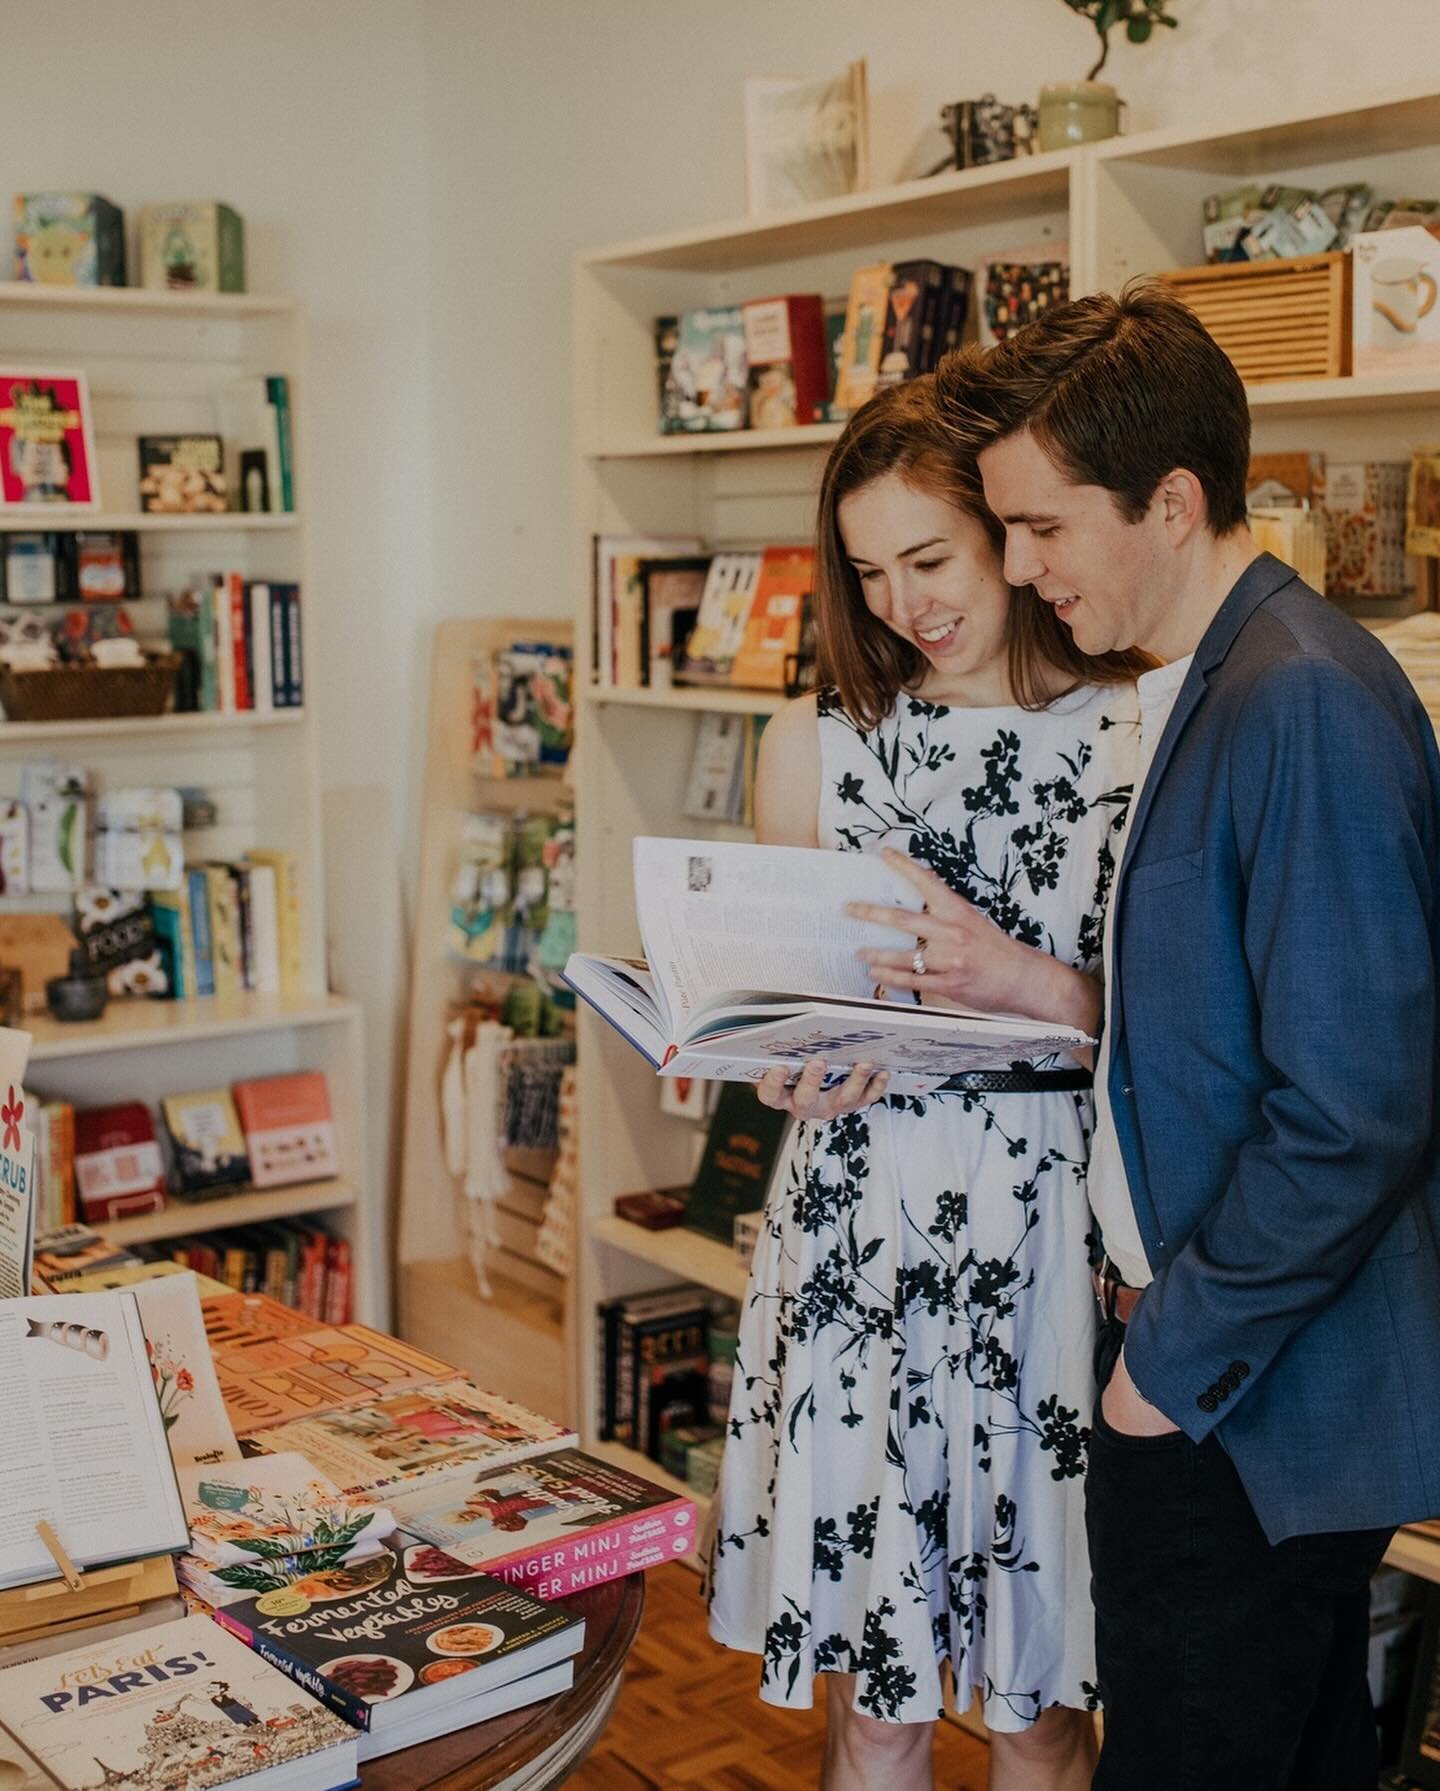 My childhood friend Bonnie is marrying the love of her life. We photographed their engagement session at Peddlers Village yesterday morning and ended our shoot in a bookstore. What could be better? 
.
#bookpost #bookalcoholic #book #booklover #bettin